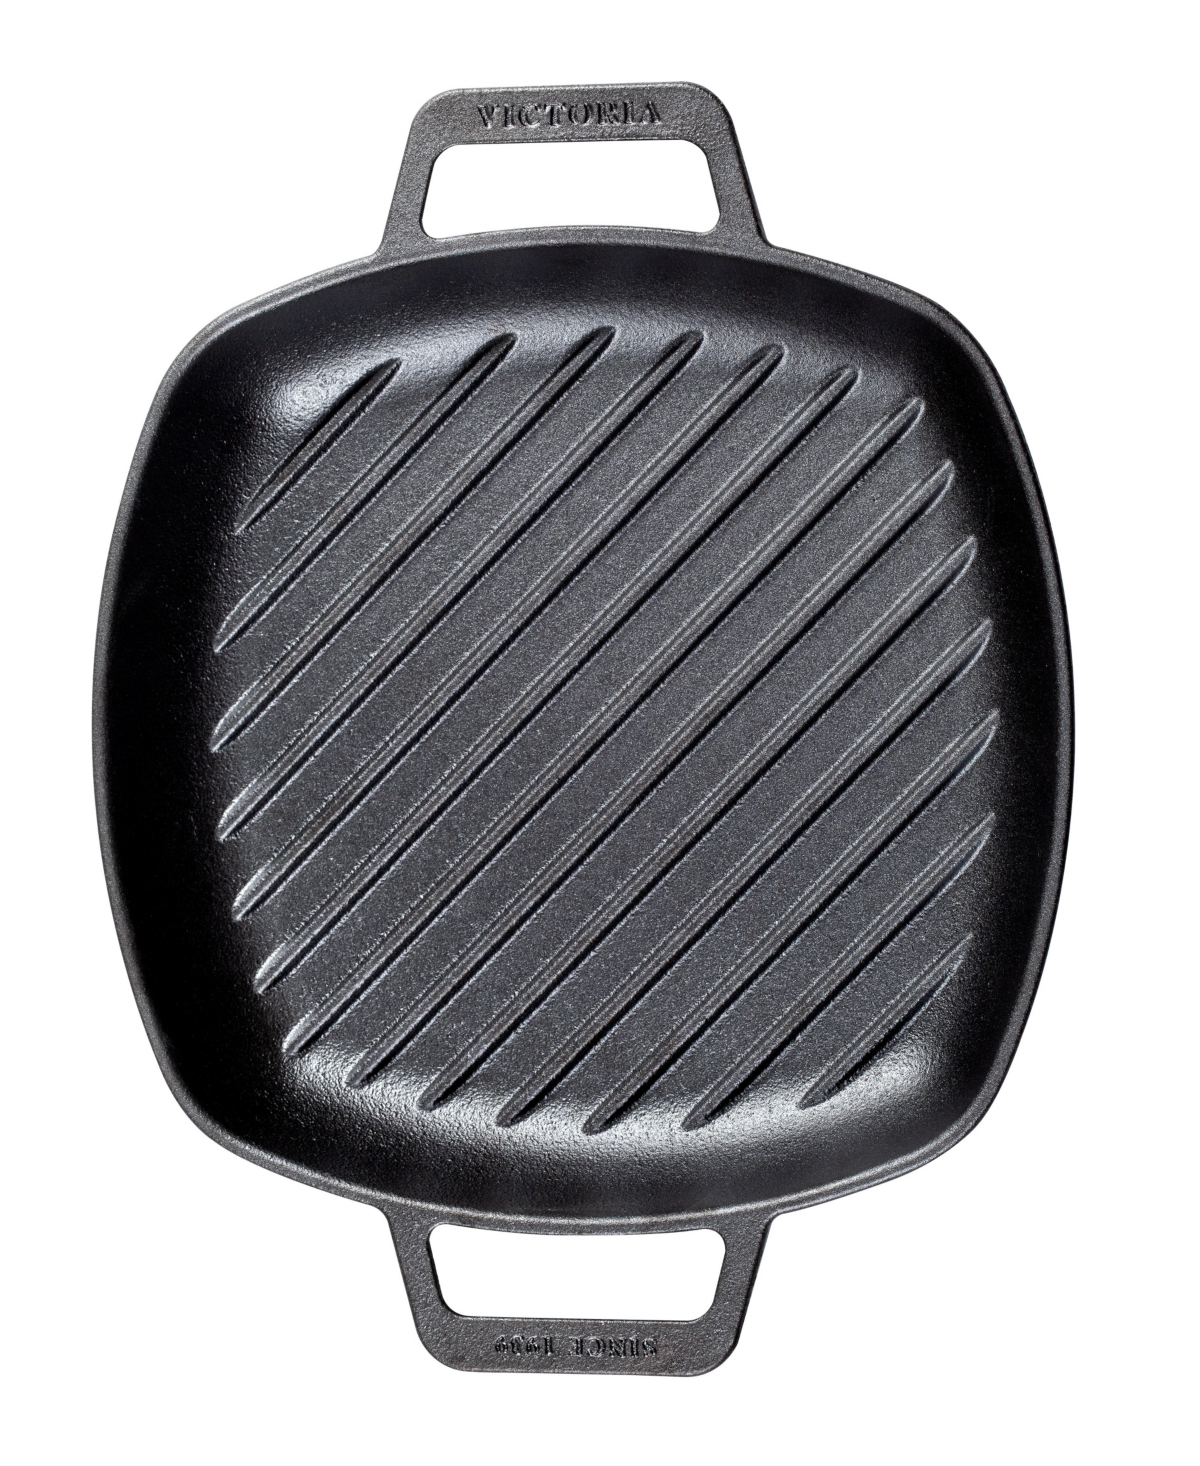 Victoria 10in Square Grill Pan With Double Loop Handles, Seasoned In Black